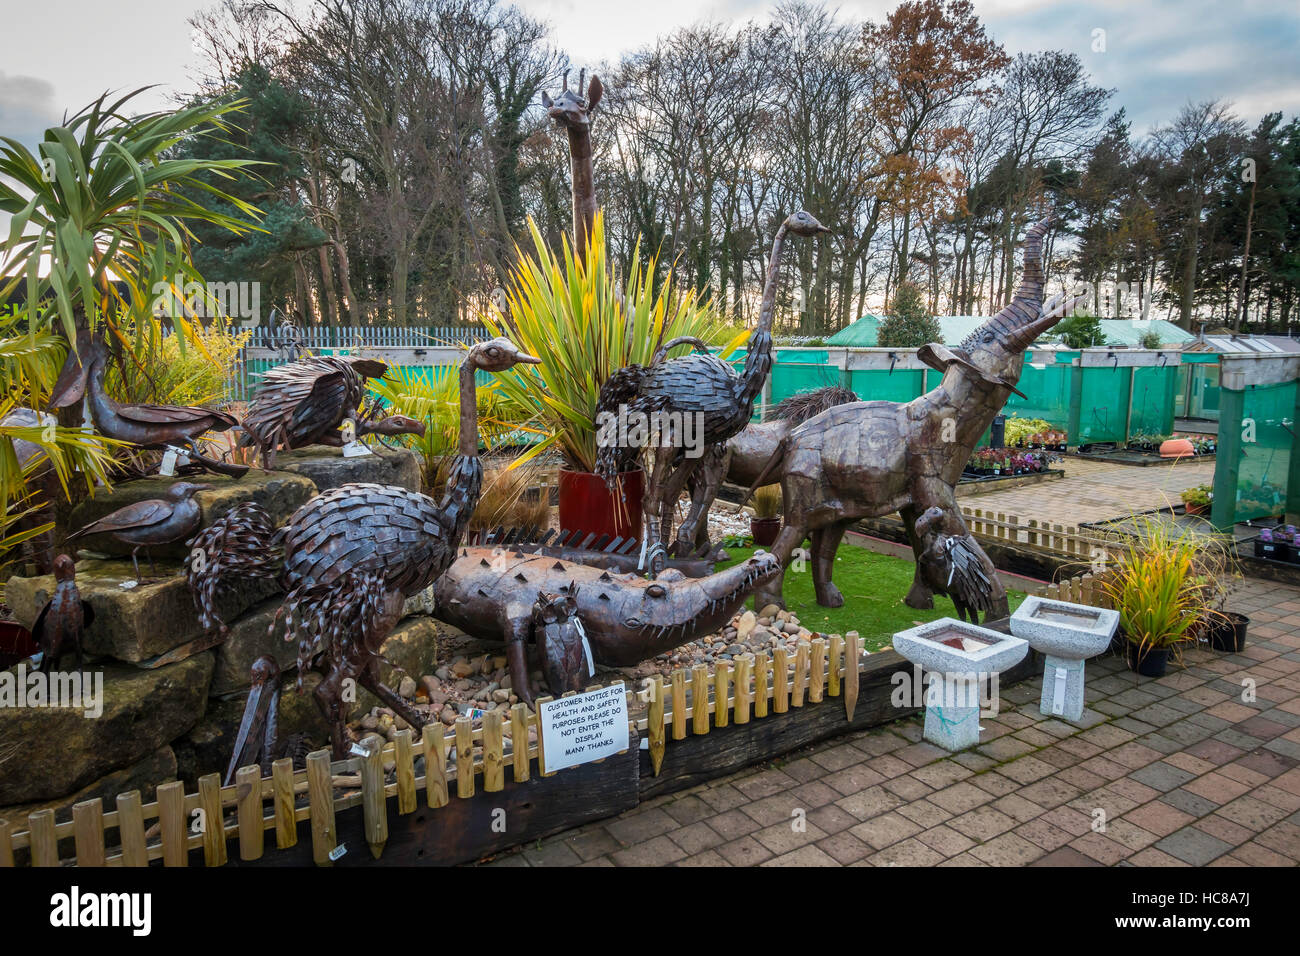 A collection of garden ornaments large steel giraffes crocodiles and ostriches statues in a suburban garden centre Stock Photo